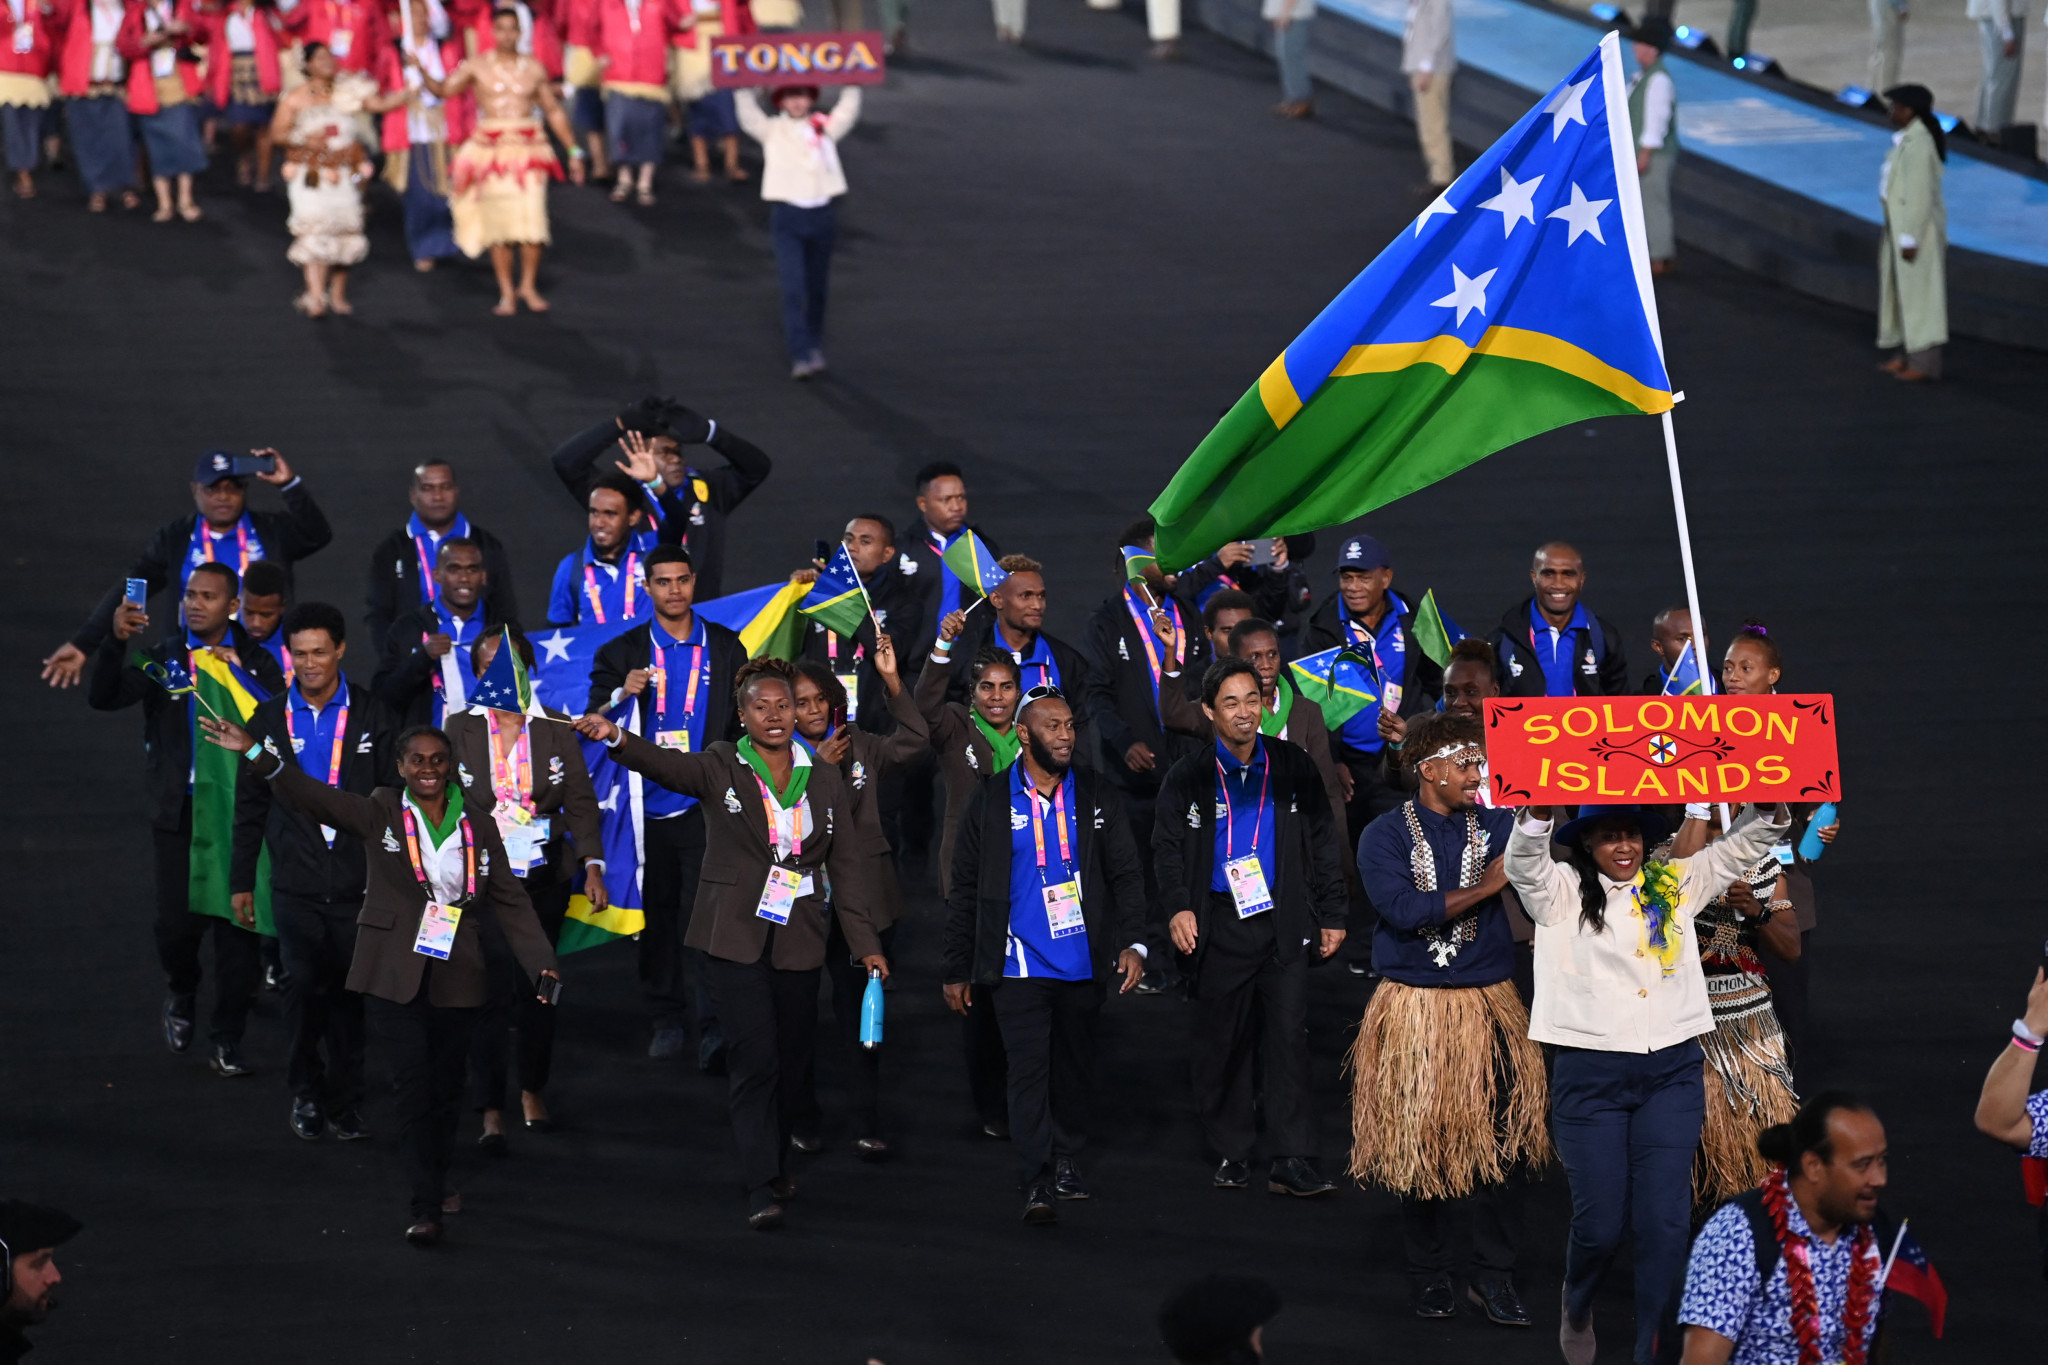 The Solomon Islands is set to host the Pacific Games from November 19 to December 2 this year ©Getty Images